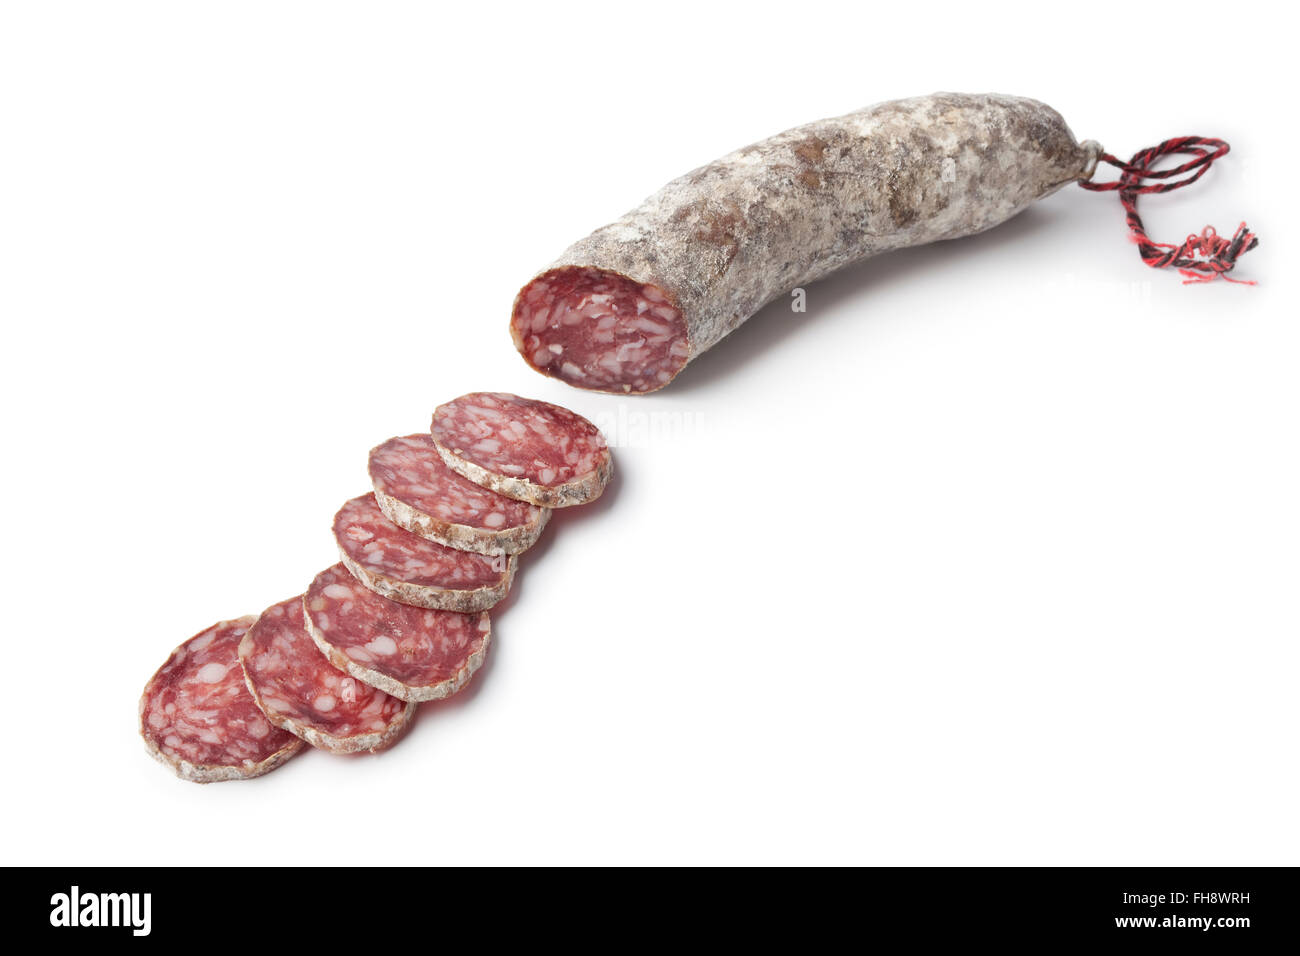 Sliced French Sausage on white background Stock Photo